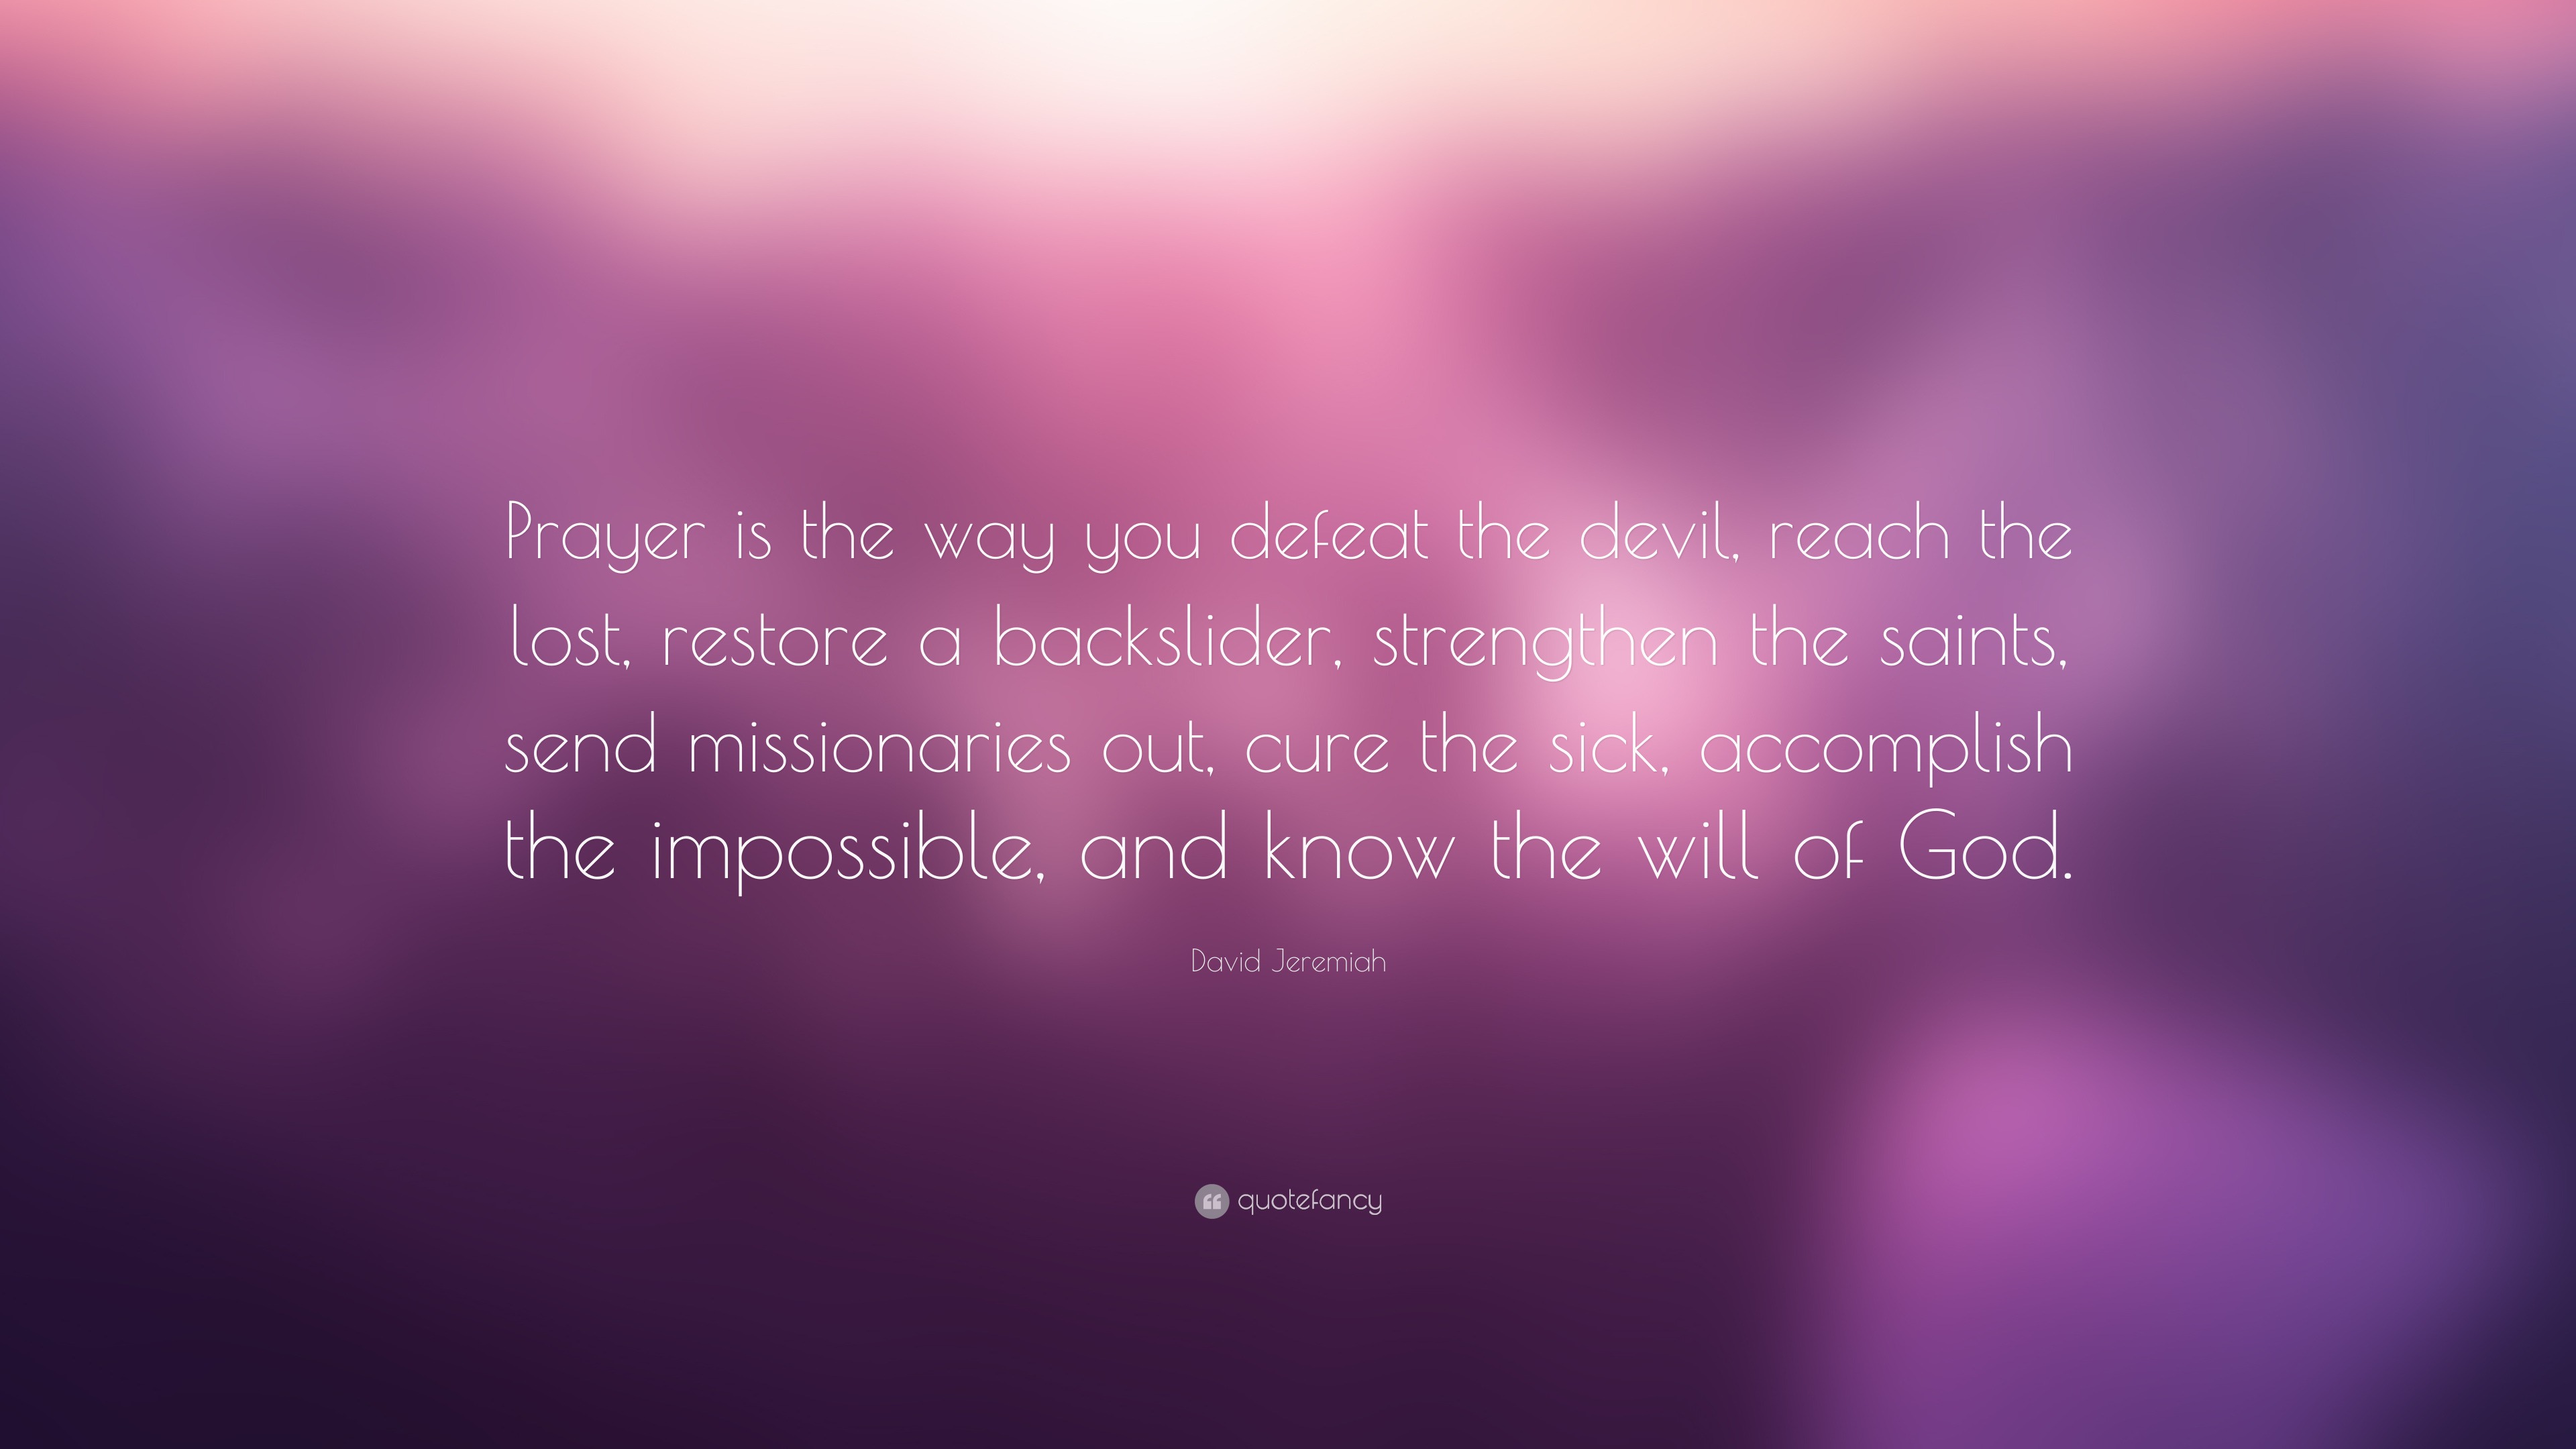 David Jeremiah Quote: “Prayer is the way you defeat the devil, reach ...